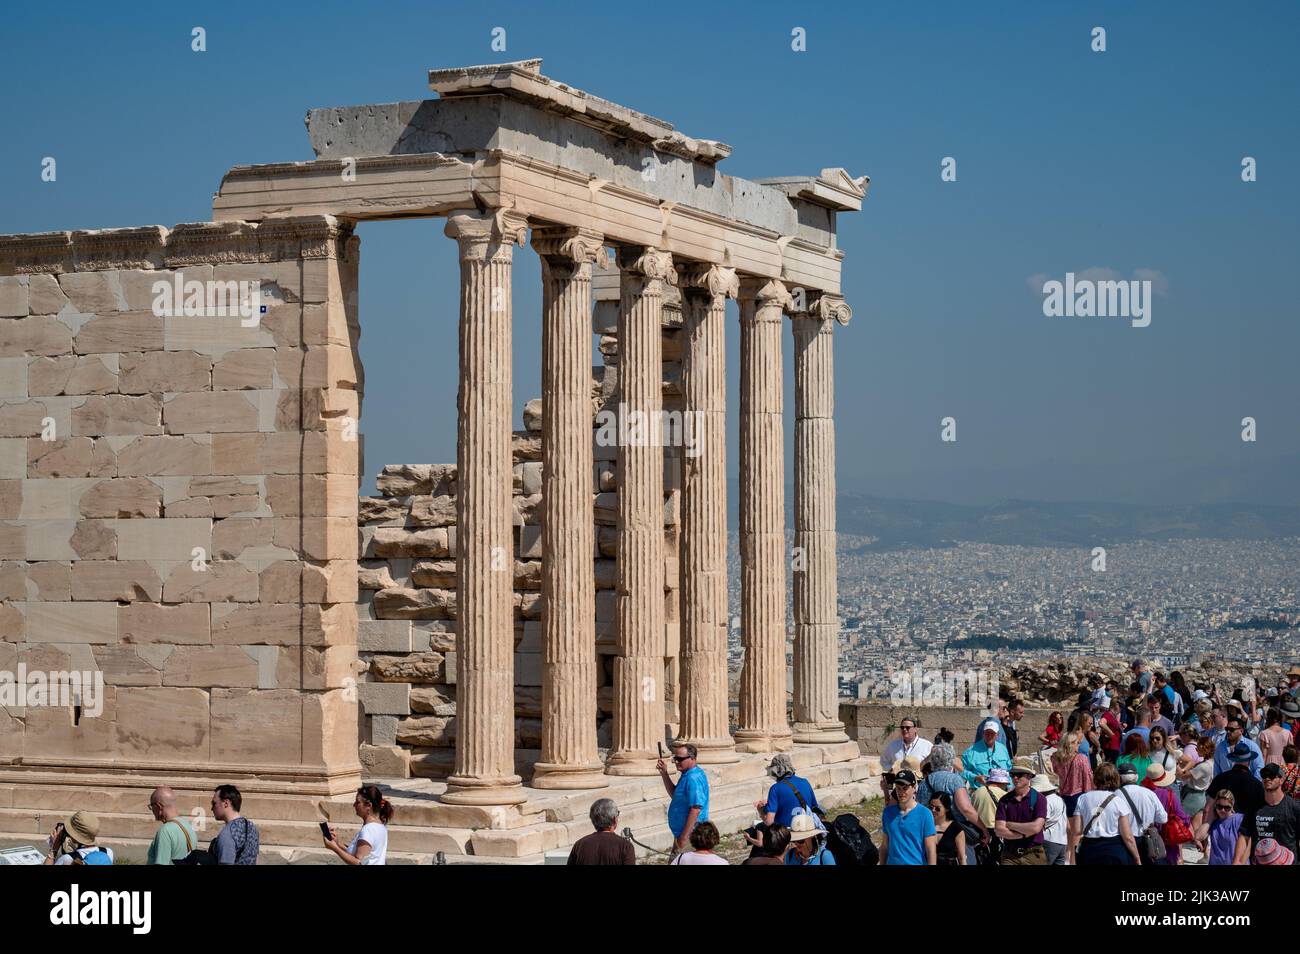 ATHENS, GREECE - MAY 14, 2022: The Acropolis of Athens is an ancient citadel perched on a rocky outcrop above the city of Athens. Sunny day Stock Photo